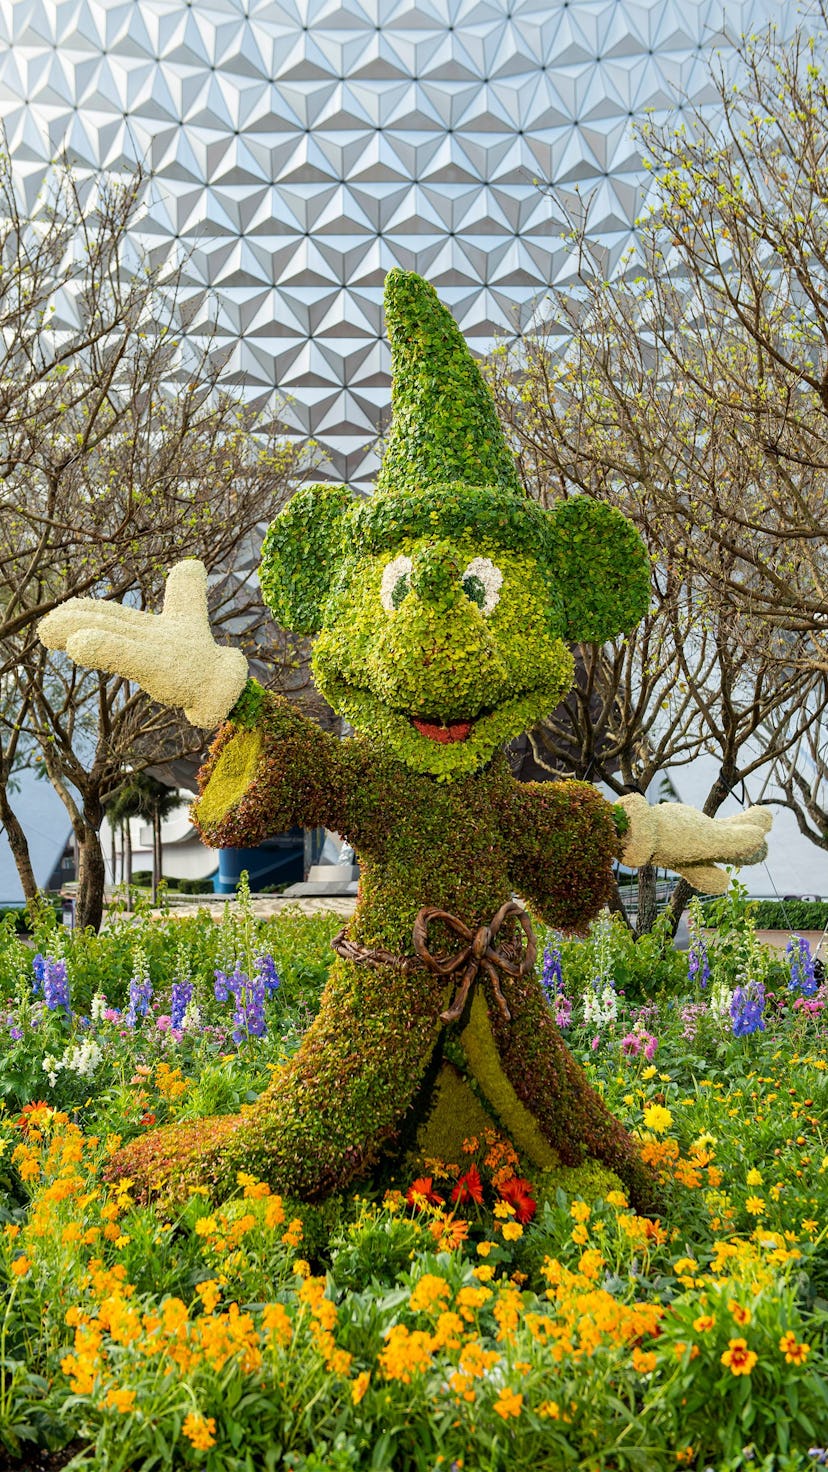 Disney's EPCOT International Flower and Garden Festival include character topiaries like this Mickey...